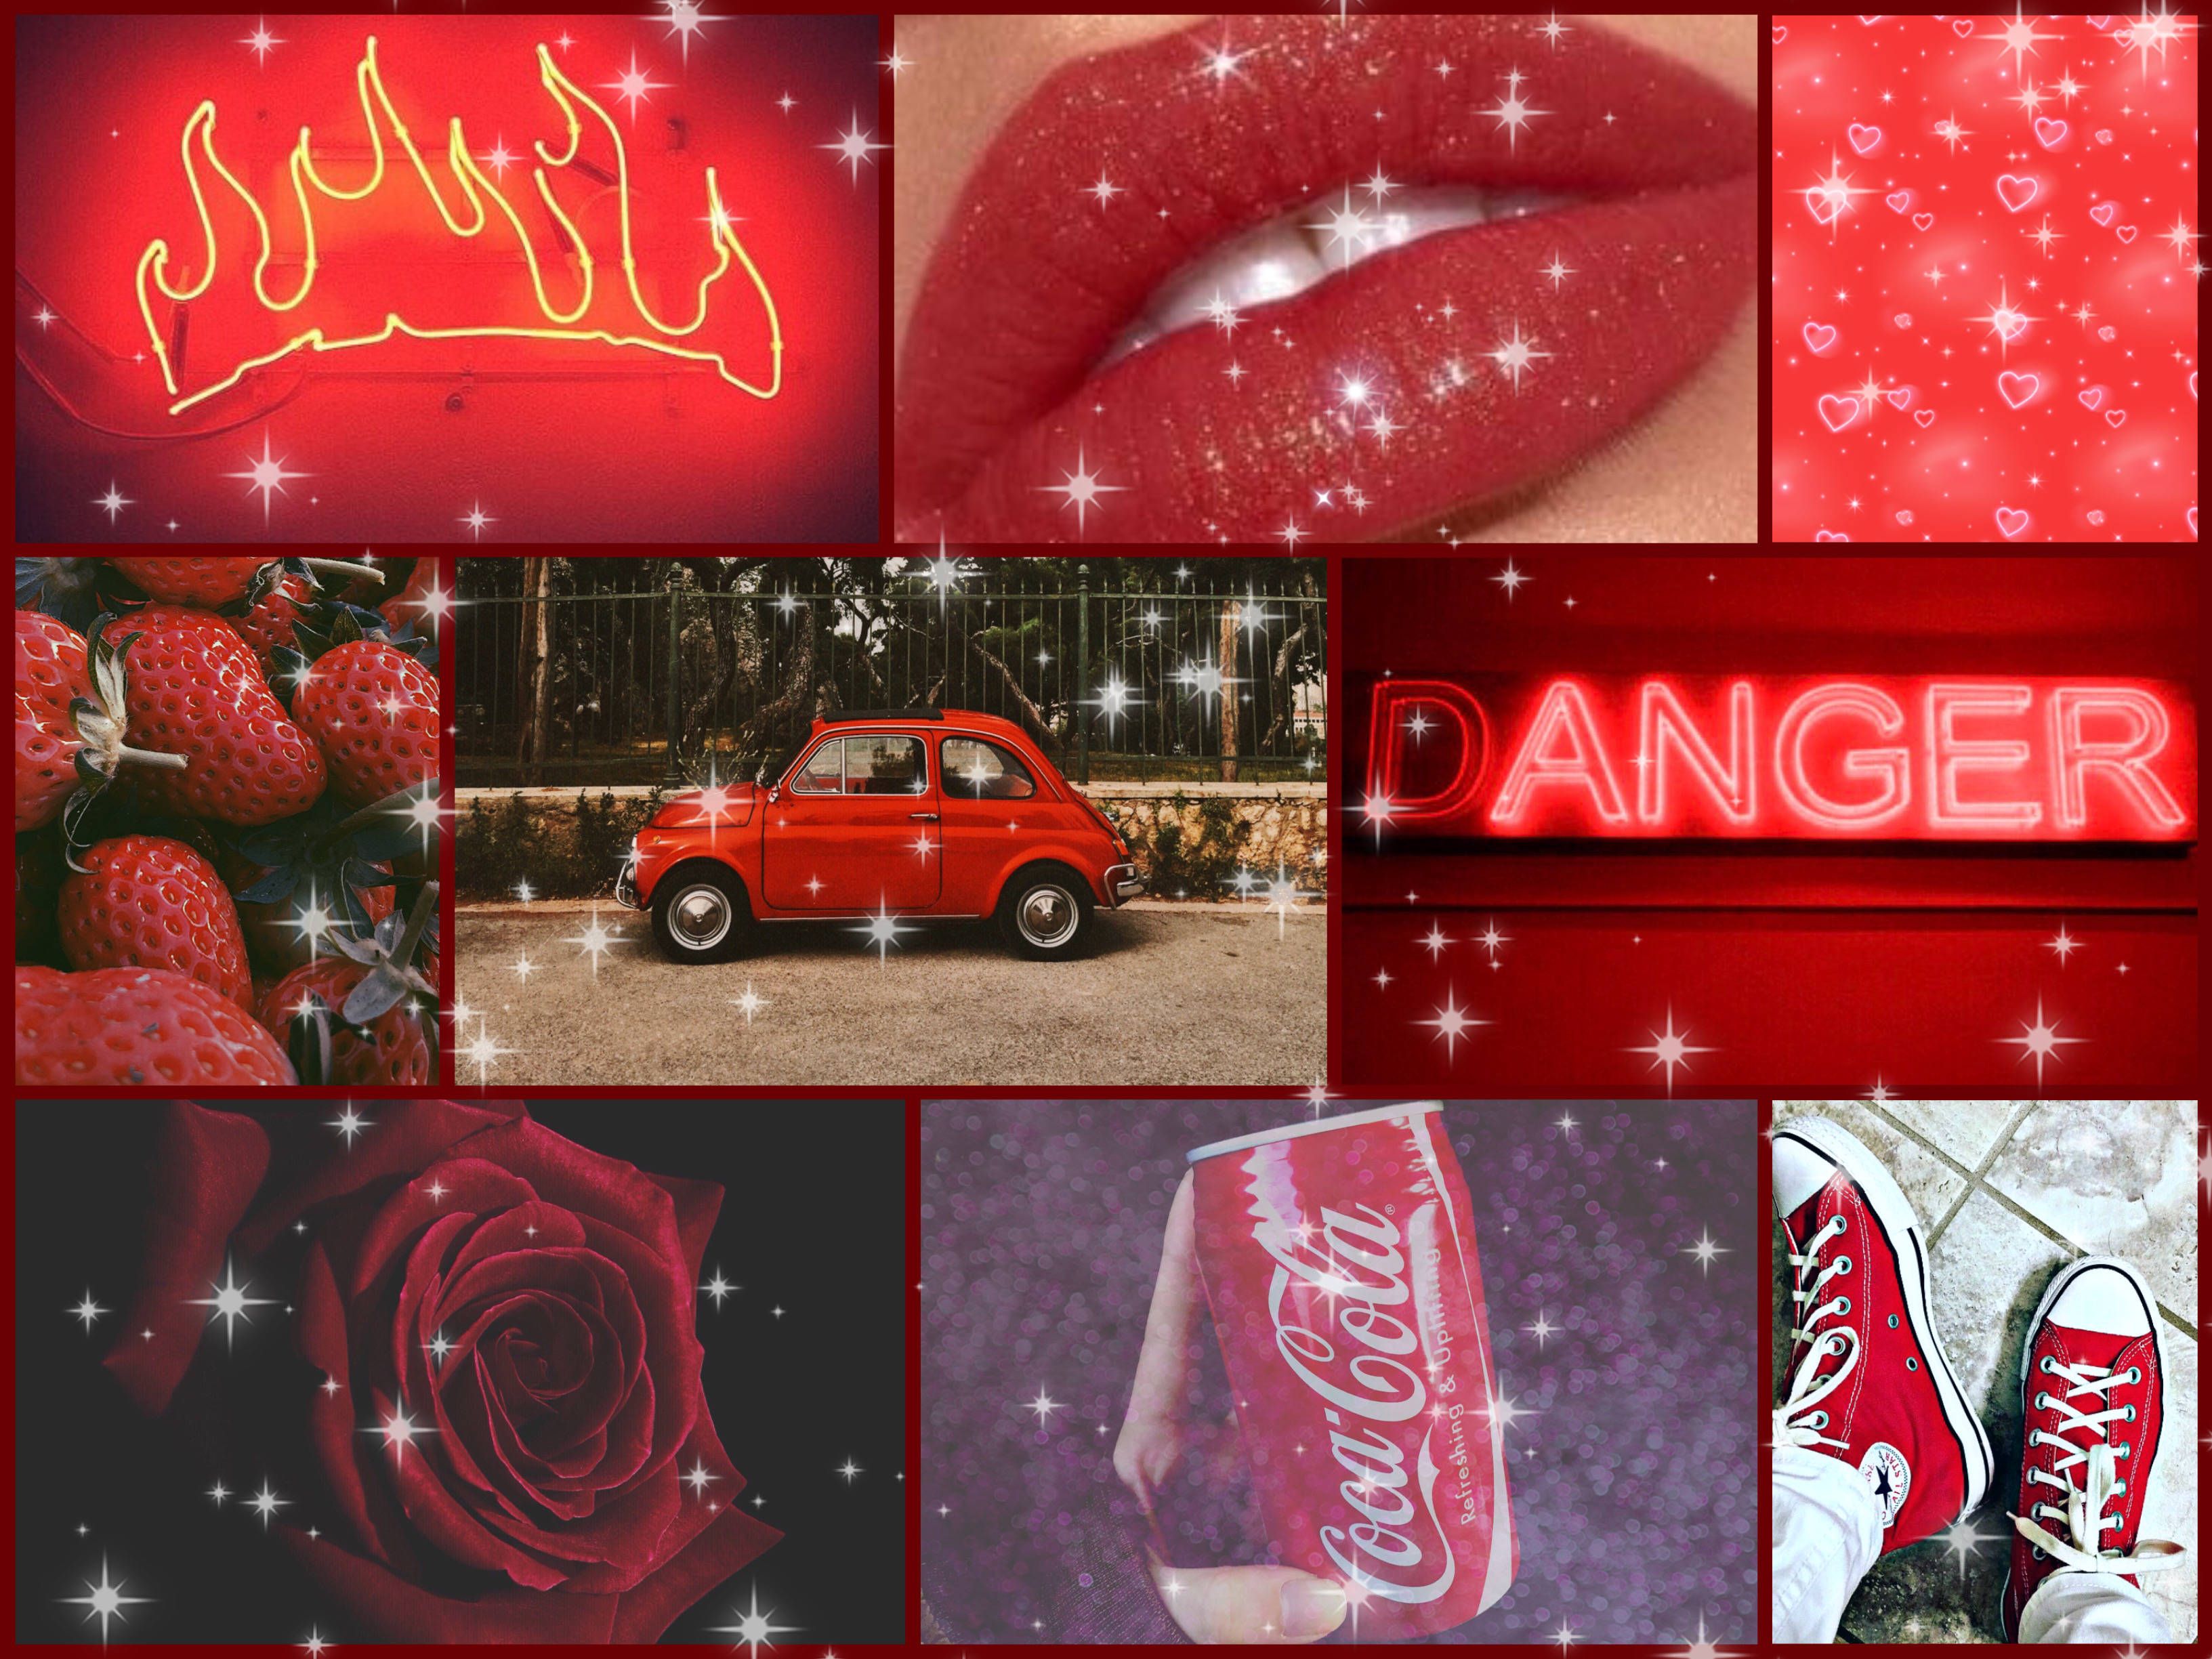 Aesthetic red collage with red car, red rose, red converse, danger sign, and red neon fire sign. - Red